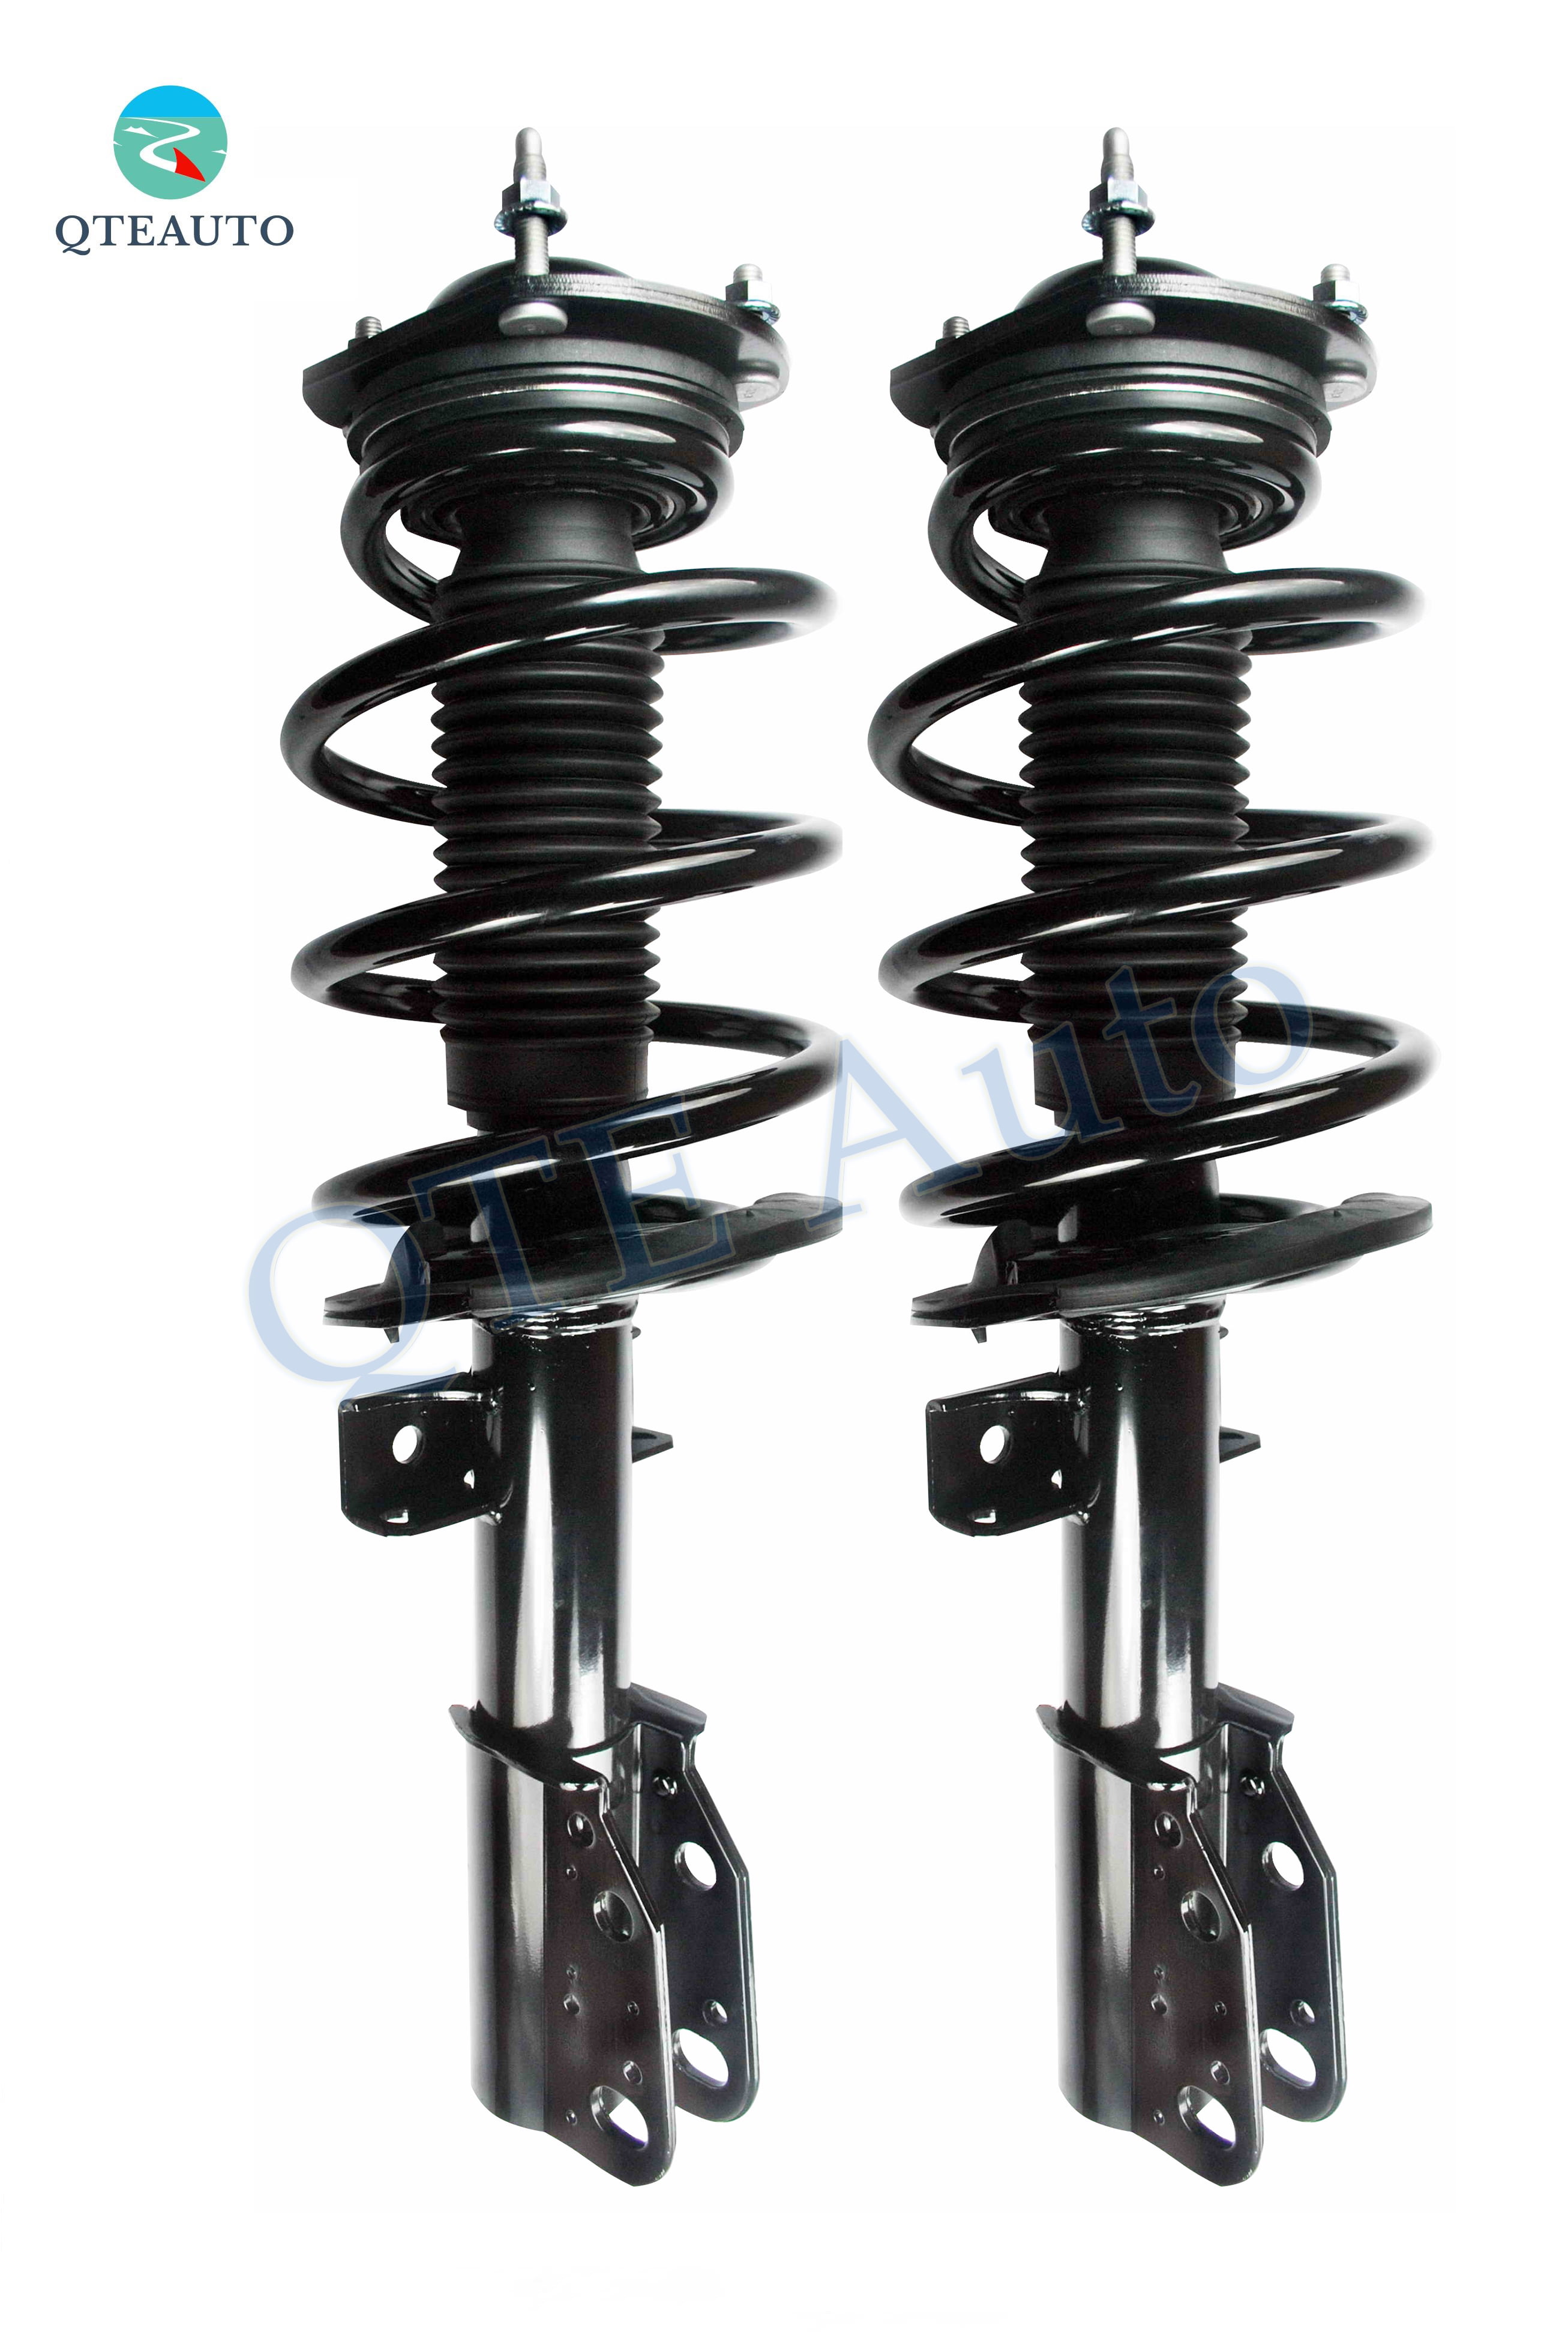 New Shock Absorber and Strut Assembly for GMC Acadia 2007-2012